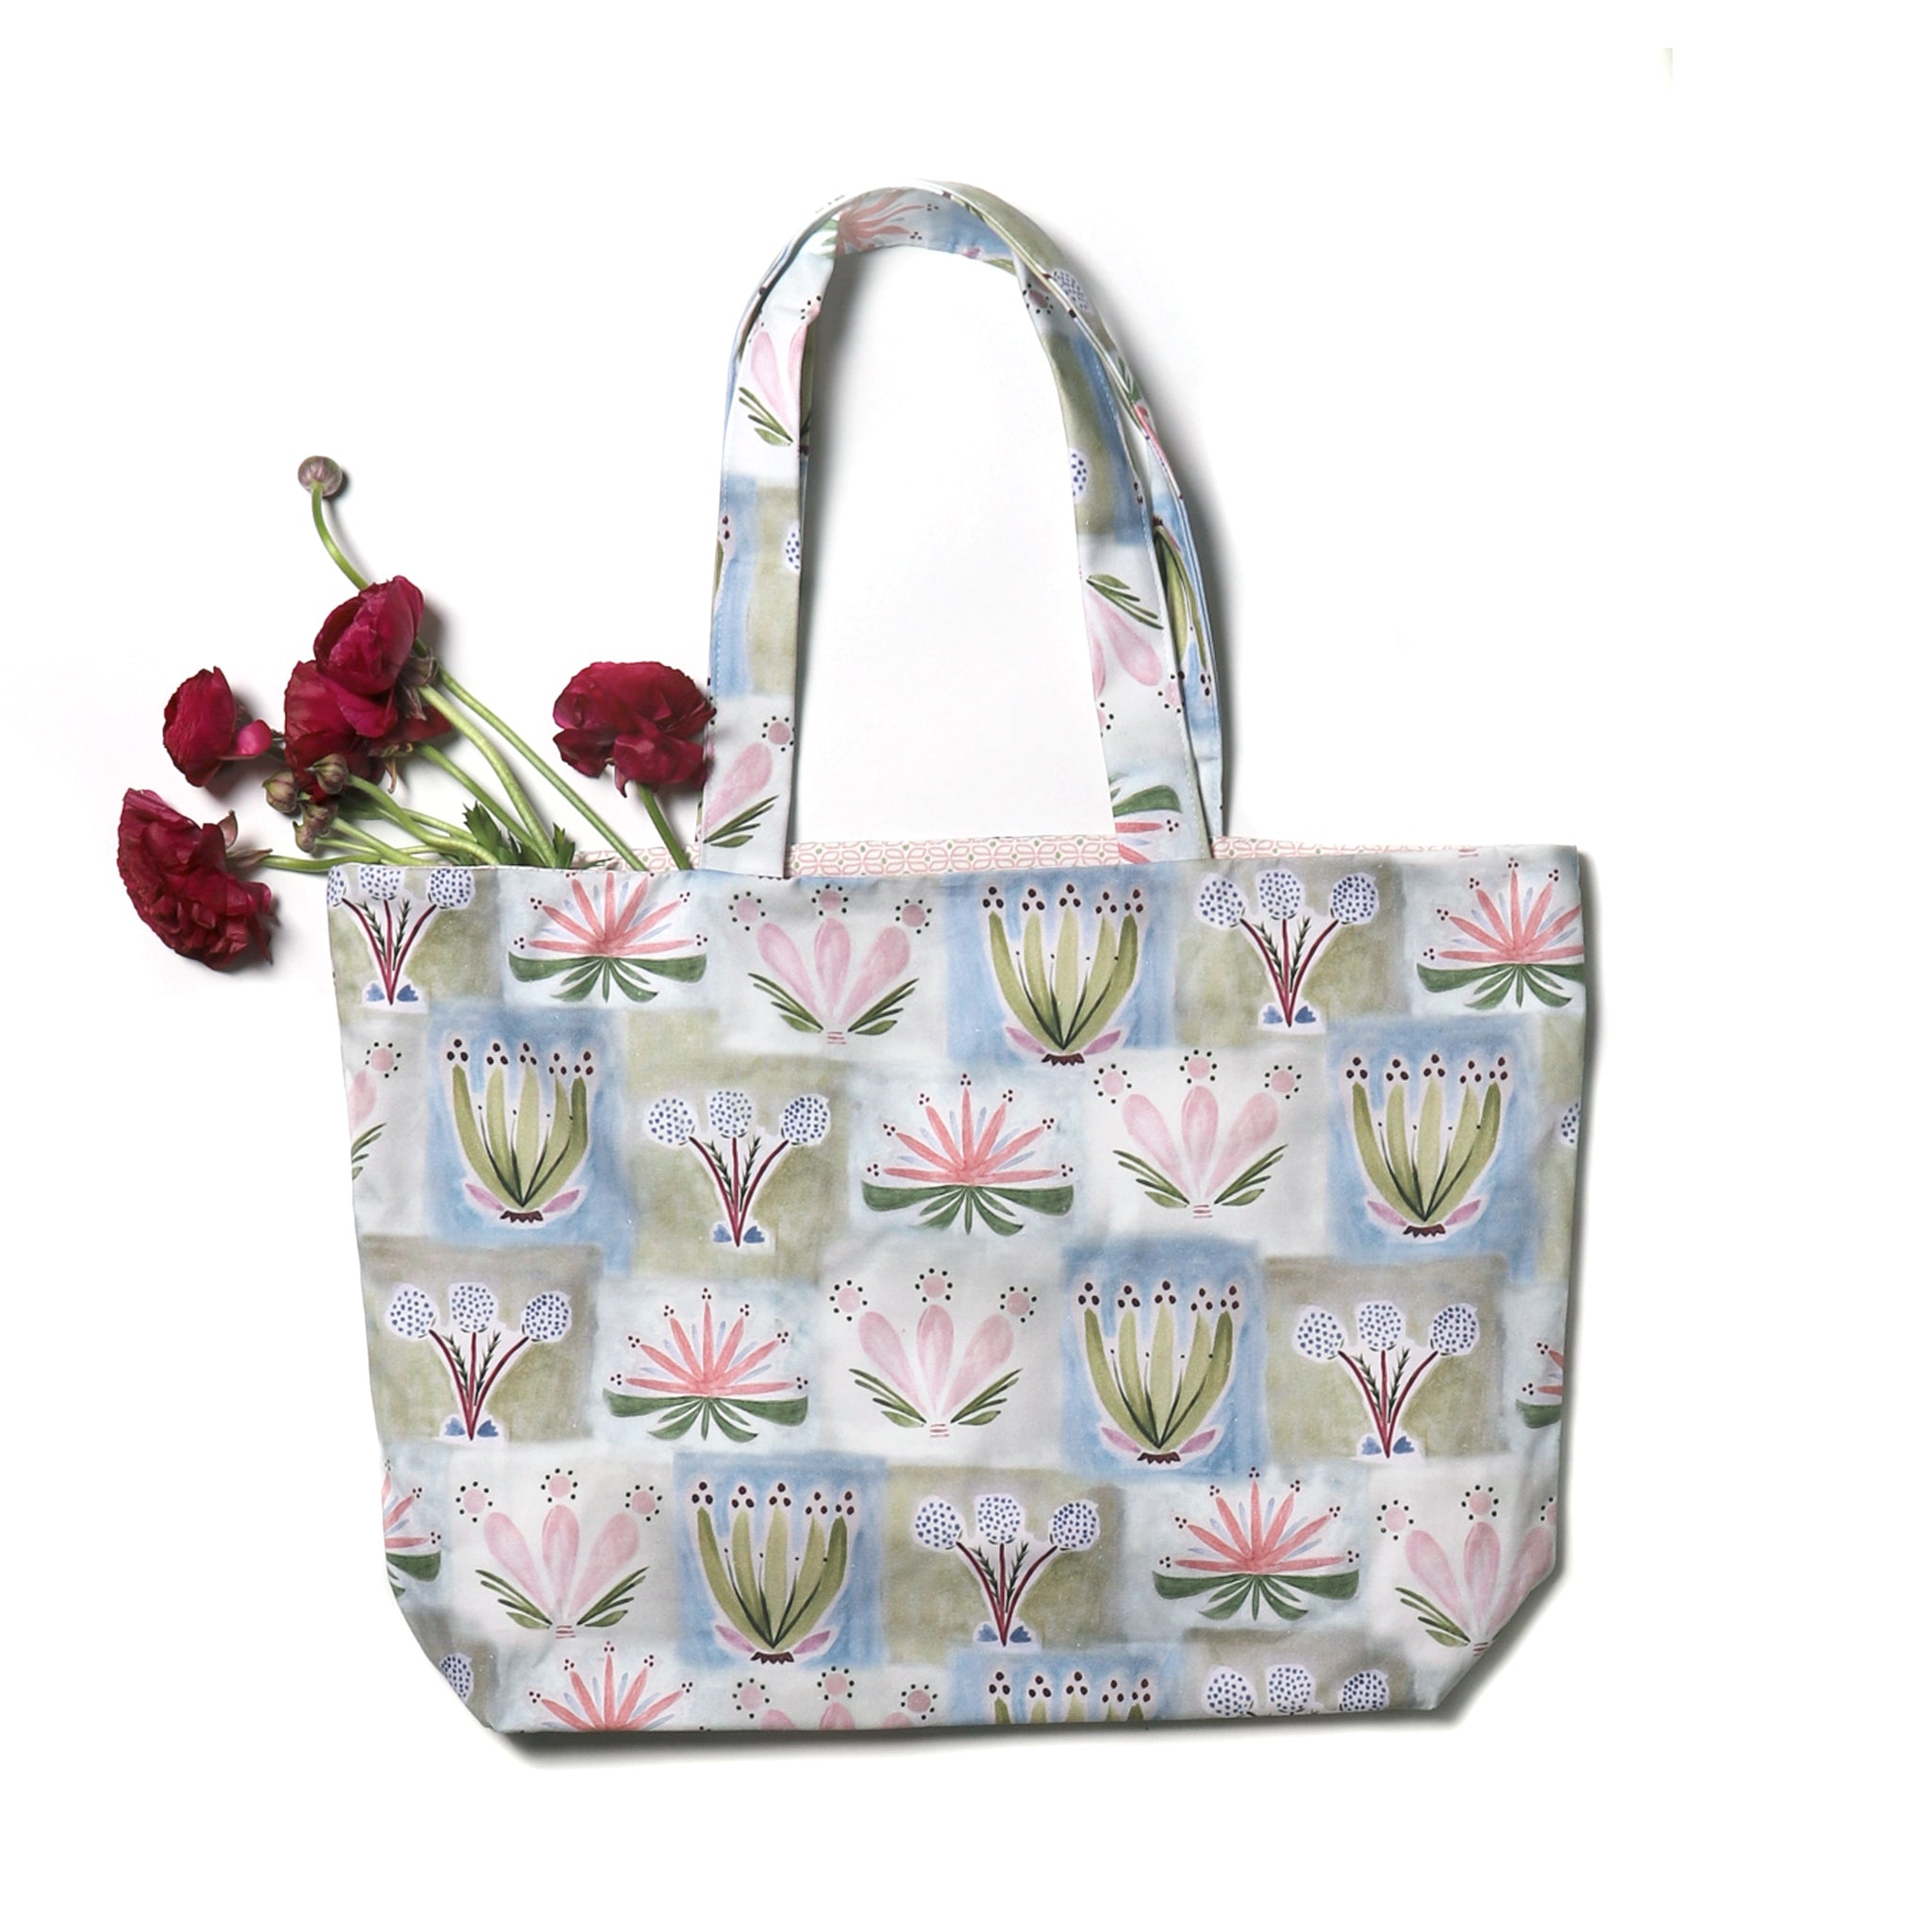 Hand-painted Floral Printed Bag with Roses inside